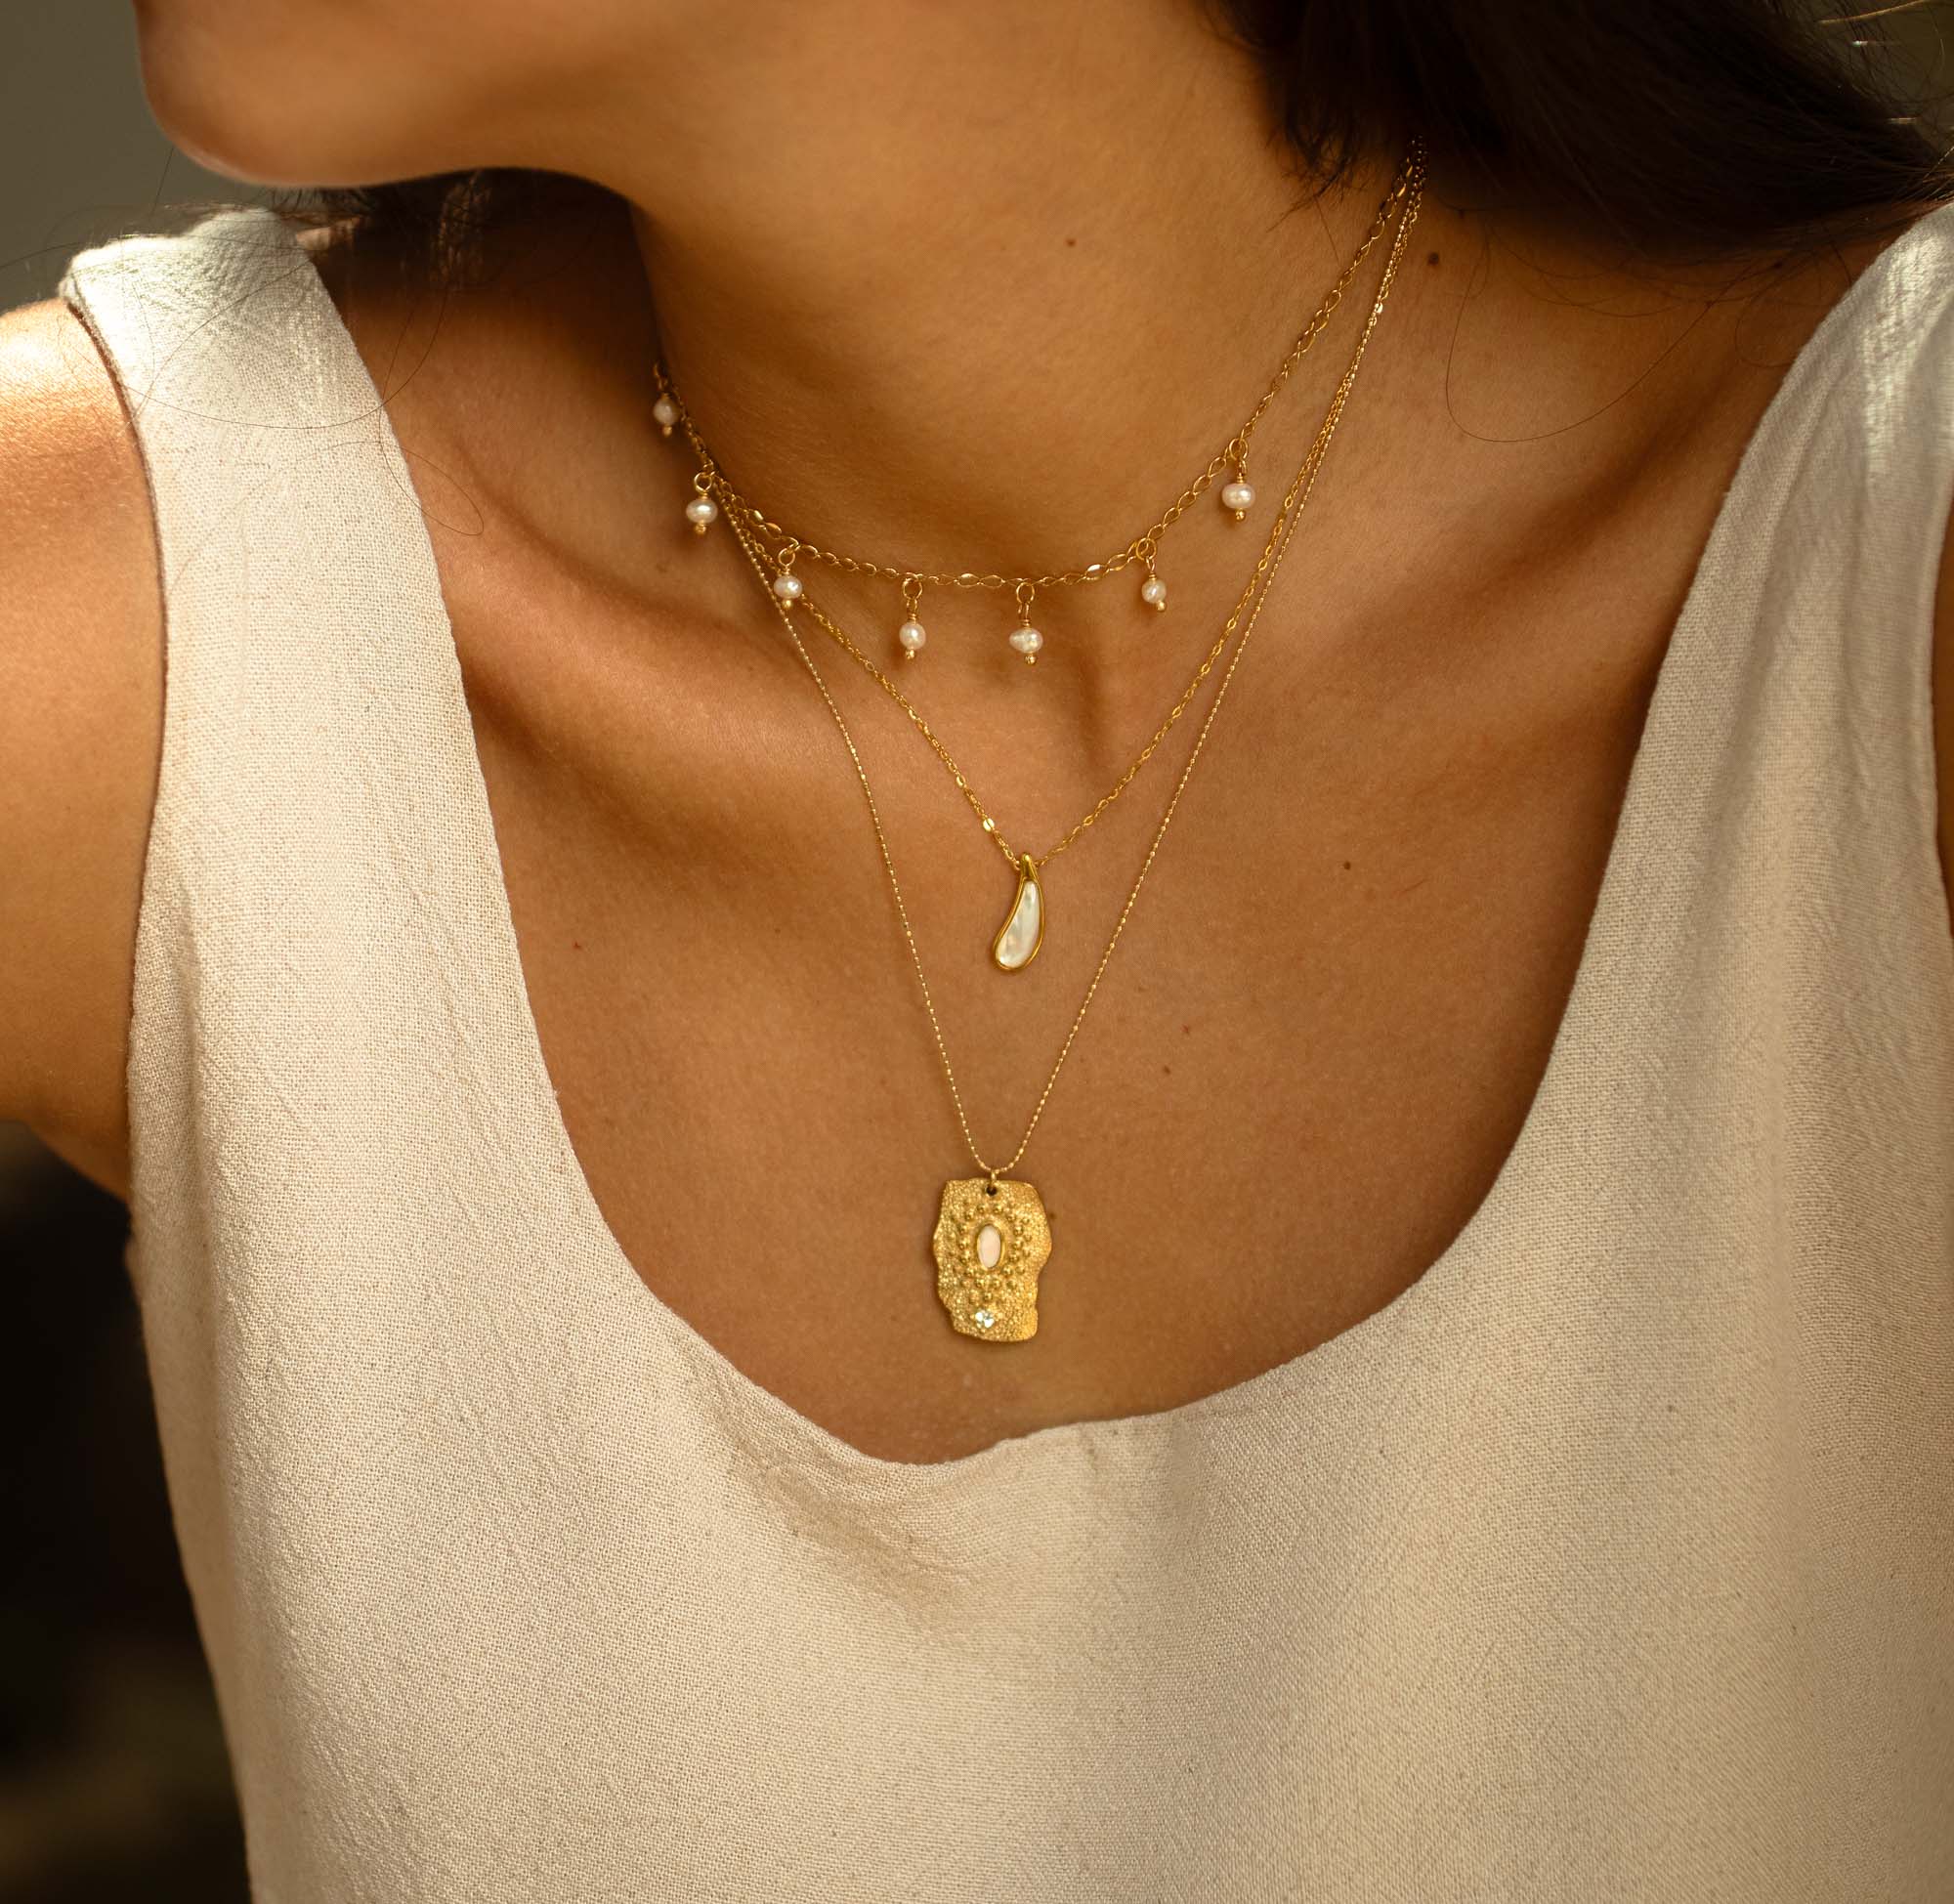 Pearls Drops Necklace